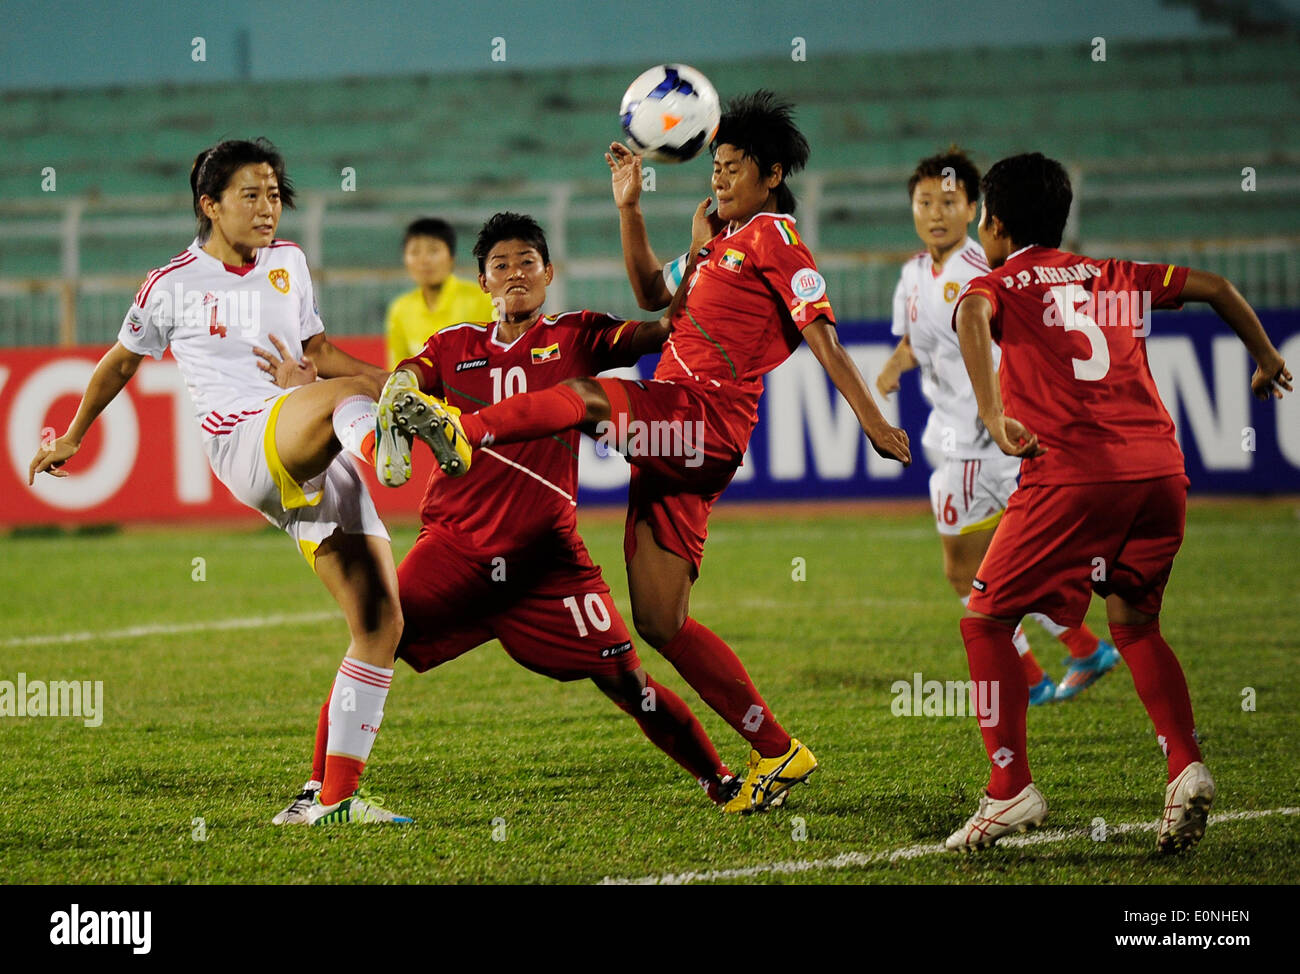 Ho Chi Minh, Vietnam. 17th May, 2014. Li Jiayue (1st L) of China vies for the ball during the Group B match against Myanmar at the 2014 Women's AFC Cup held at Thong Nhat Stadium in Ho Chi Minh city, Vietnam, May 17, 2014. China advanced to World Cup 2015 after beating Myanmar 3-0. © He Jingjia/Xinhua/Alamy Live News Stock Photo